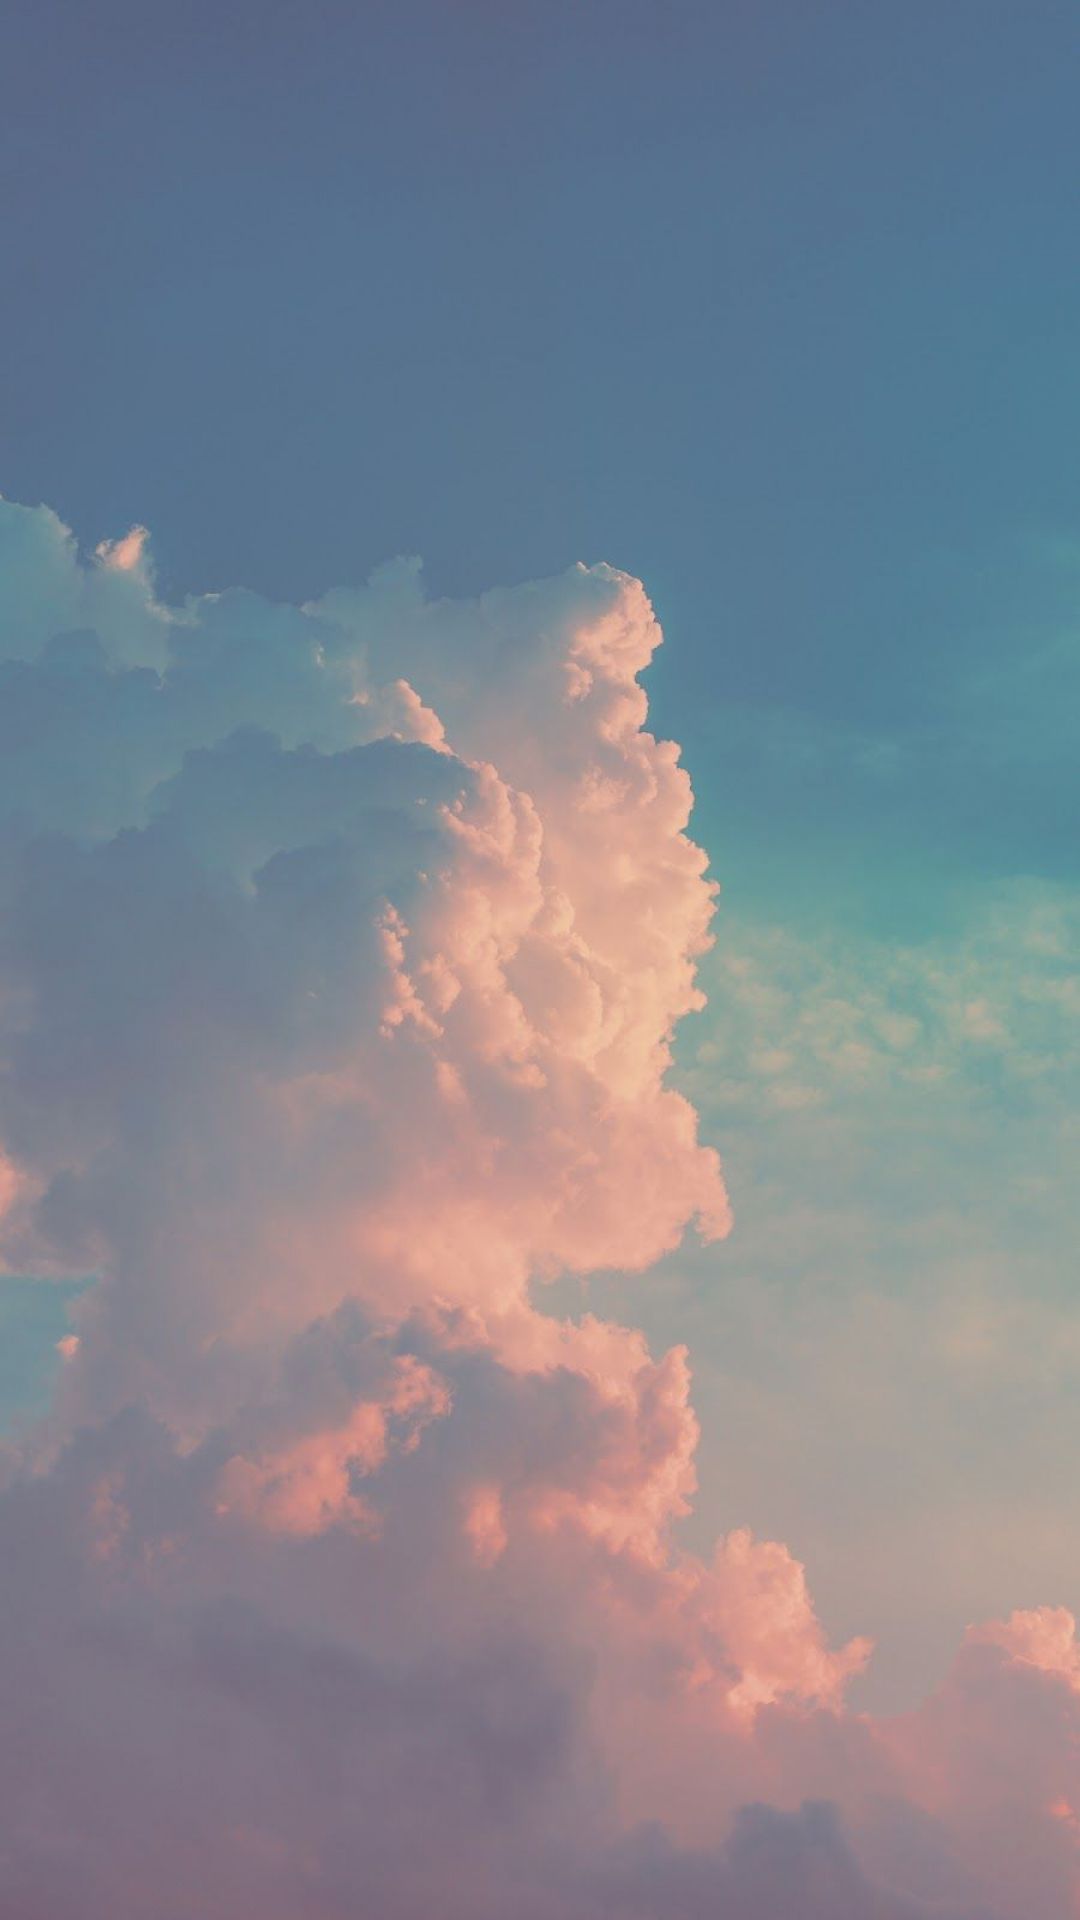 IPhone wallpaper of a sky with clouds - Cloud, vintage clouds, calming, sky, Android